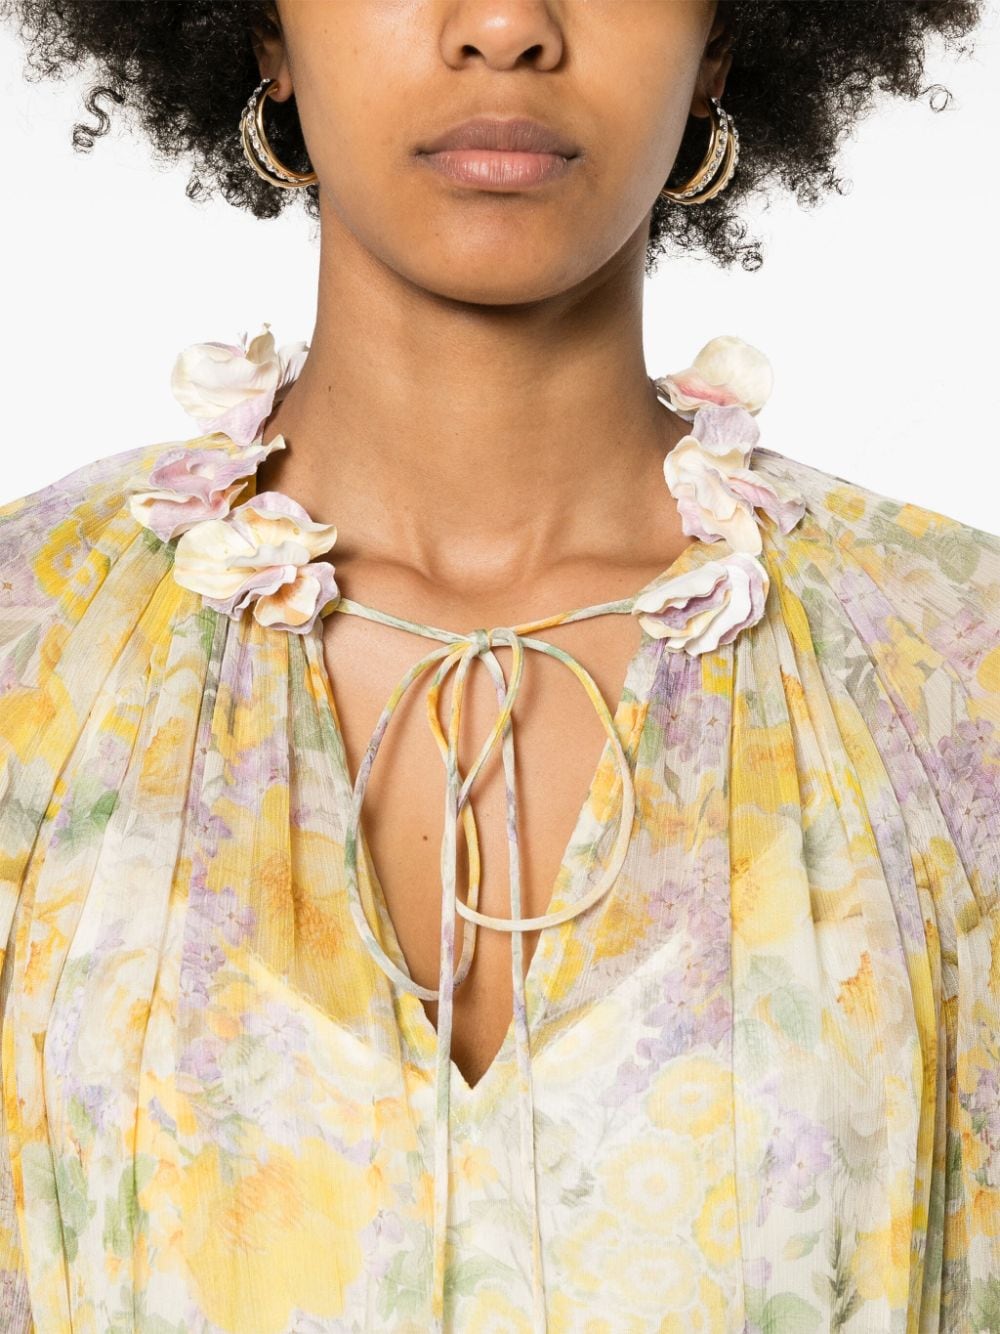 Harmony Billow floral blouse